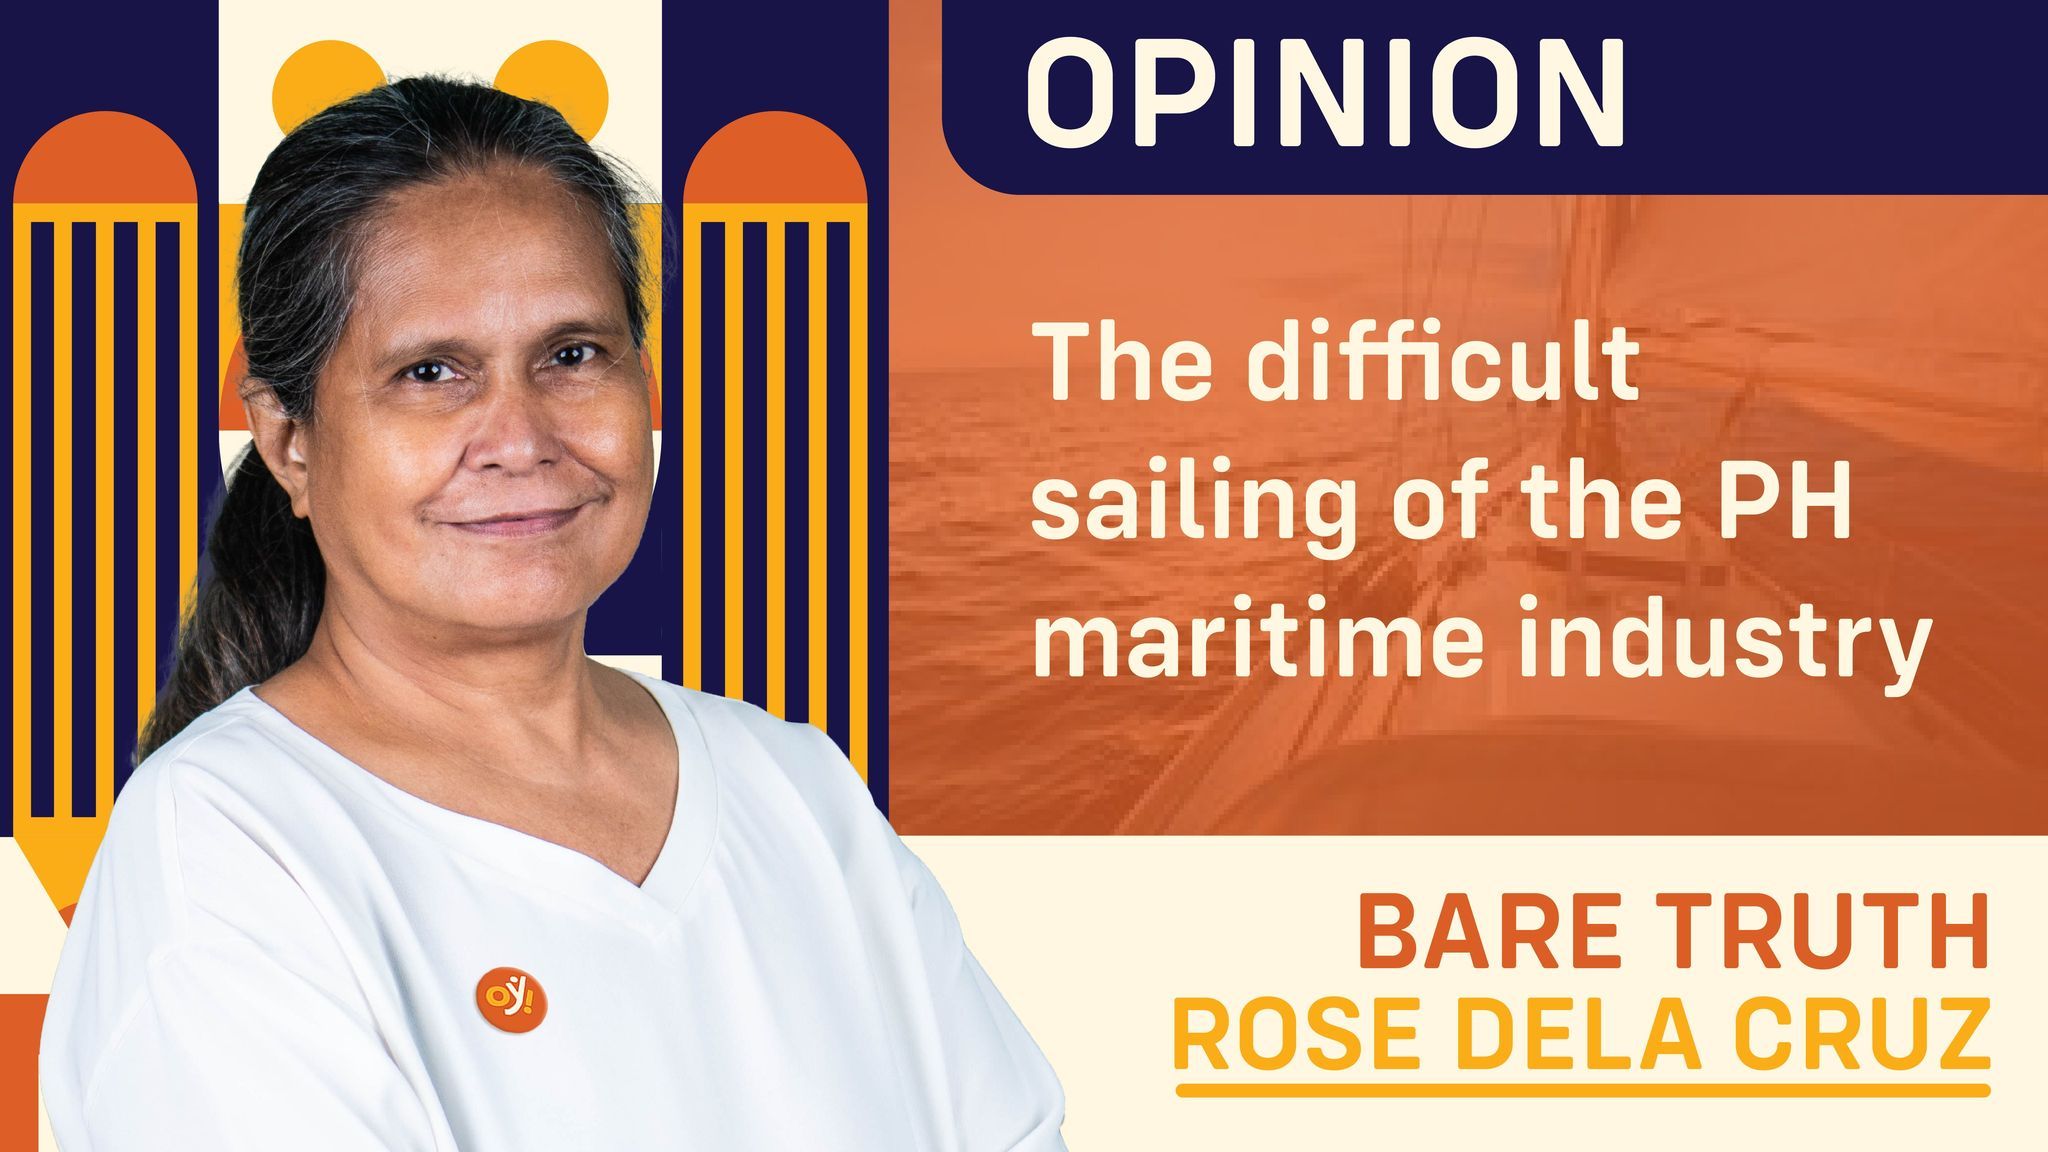 The difficult sailing of the PH maritime industry 